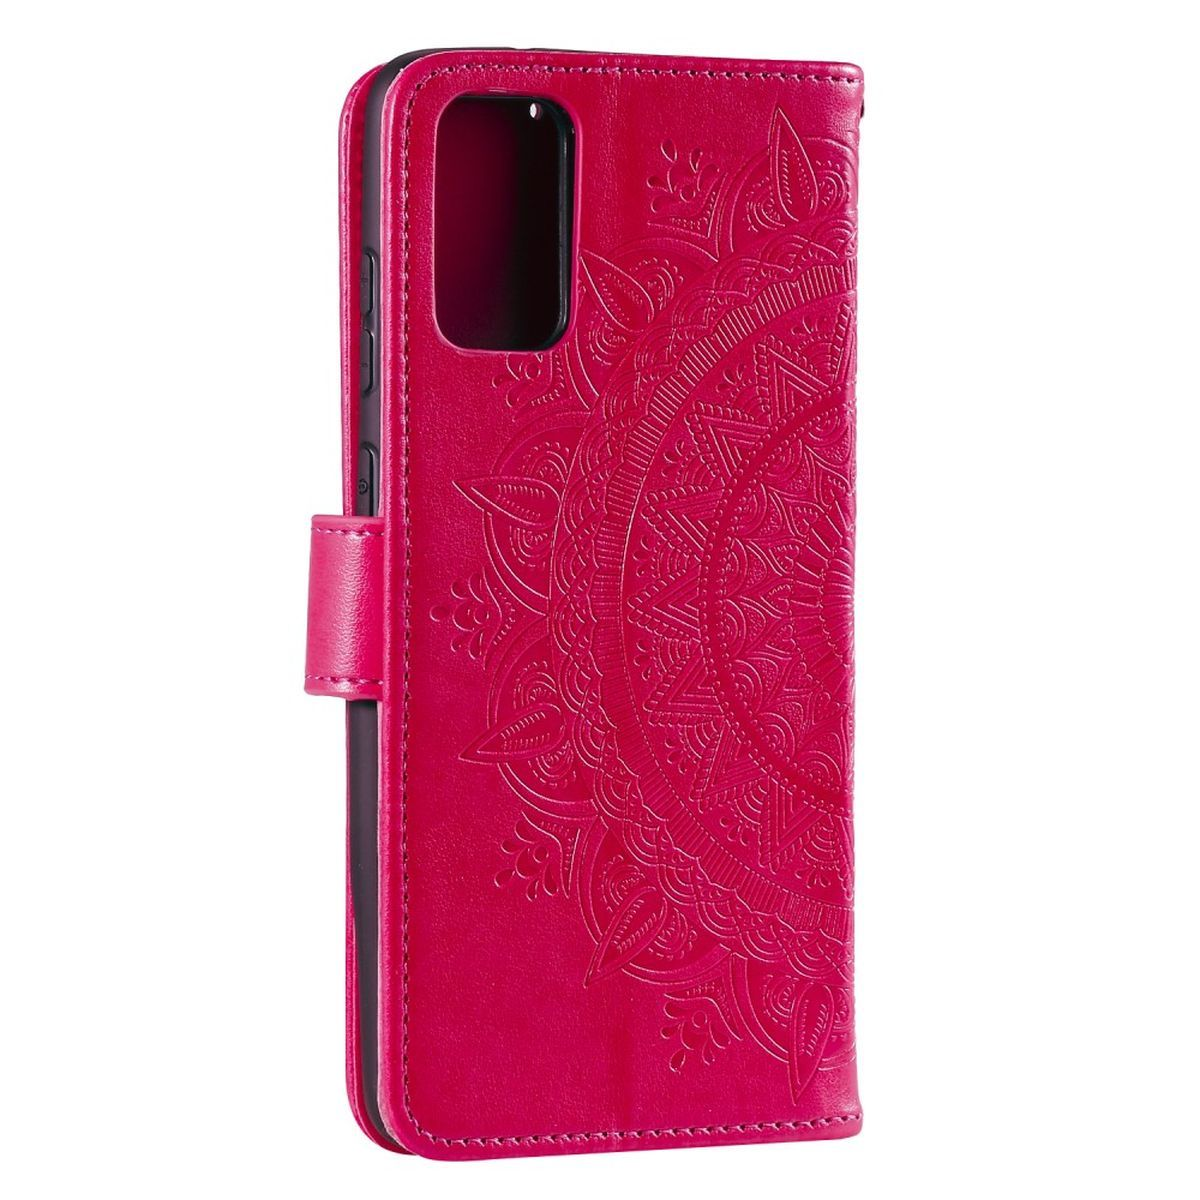 5G, Mandala Klapphülle mit Bookcover, Galaxy Muster, Pink M23 COVERKINGZ Samsung,